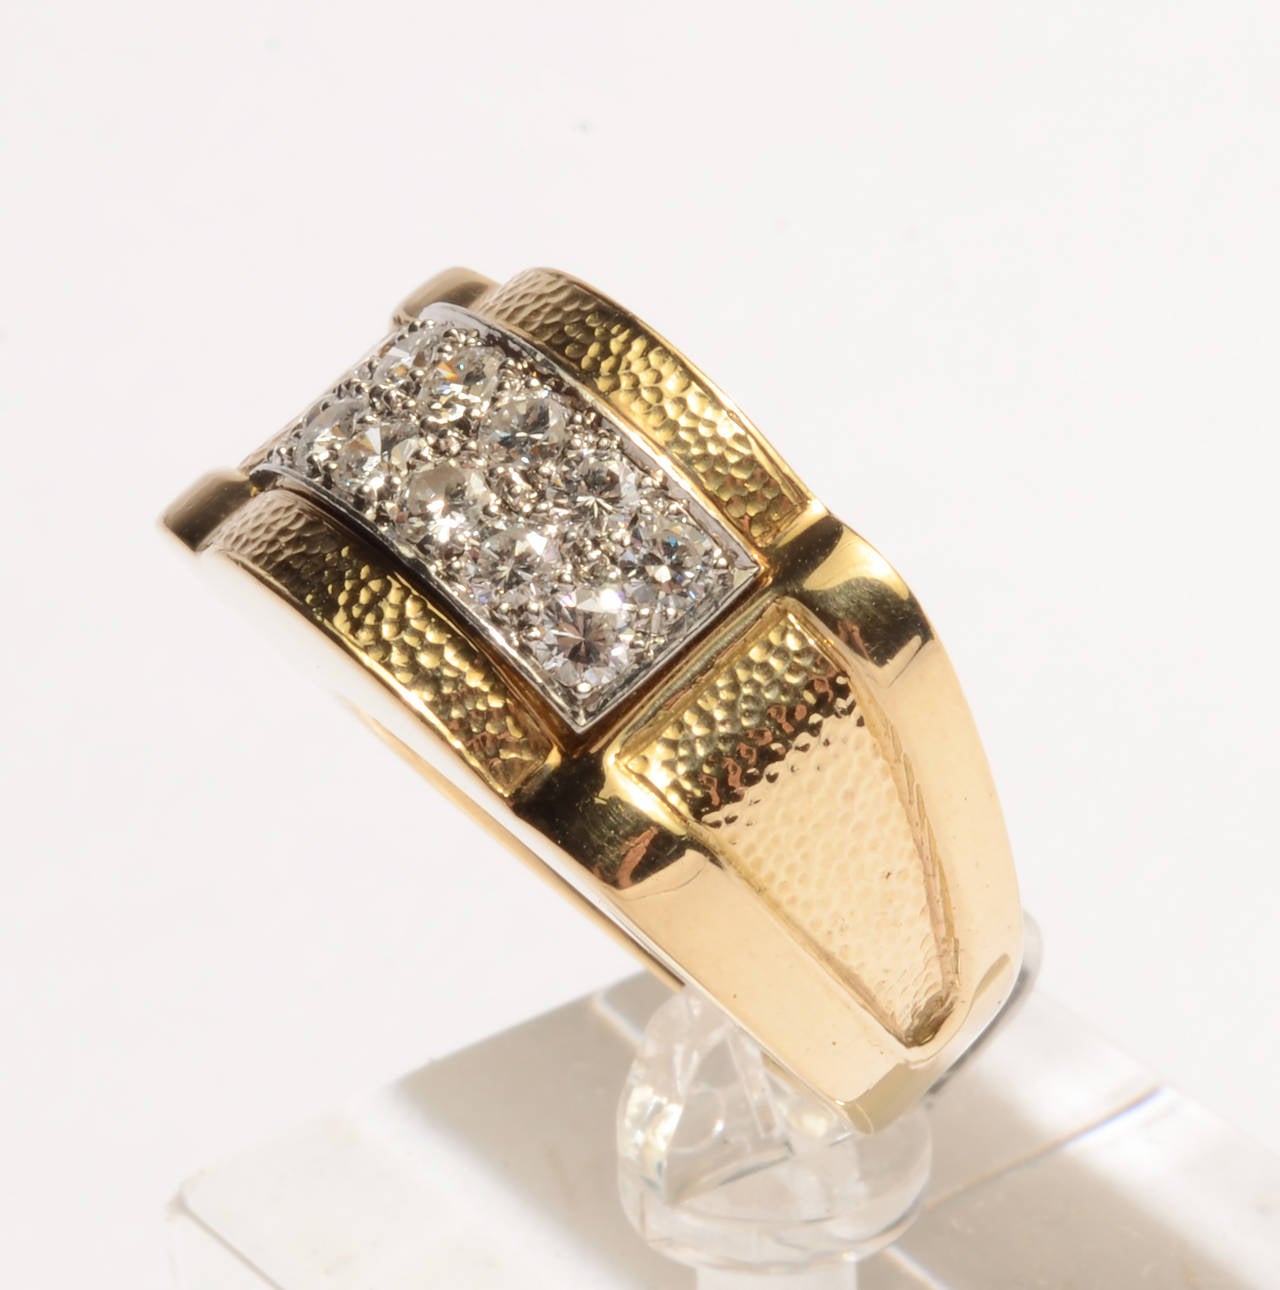 David Webb 18 karat gold ring with diamonds set in platinum. Hammered surfaces on top and sides with smooth finish front and back. Size 6 1/4 but can be sized up or down. Can be worn equally well by a man or woman. It measures 7/8